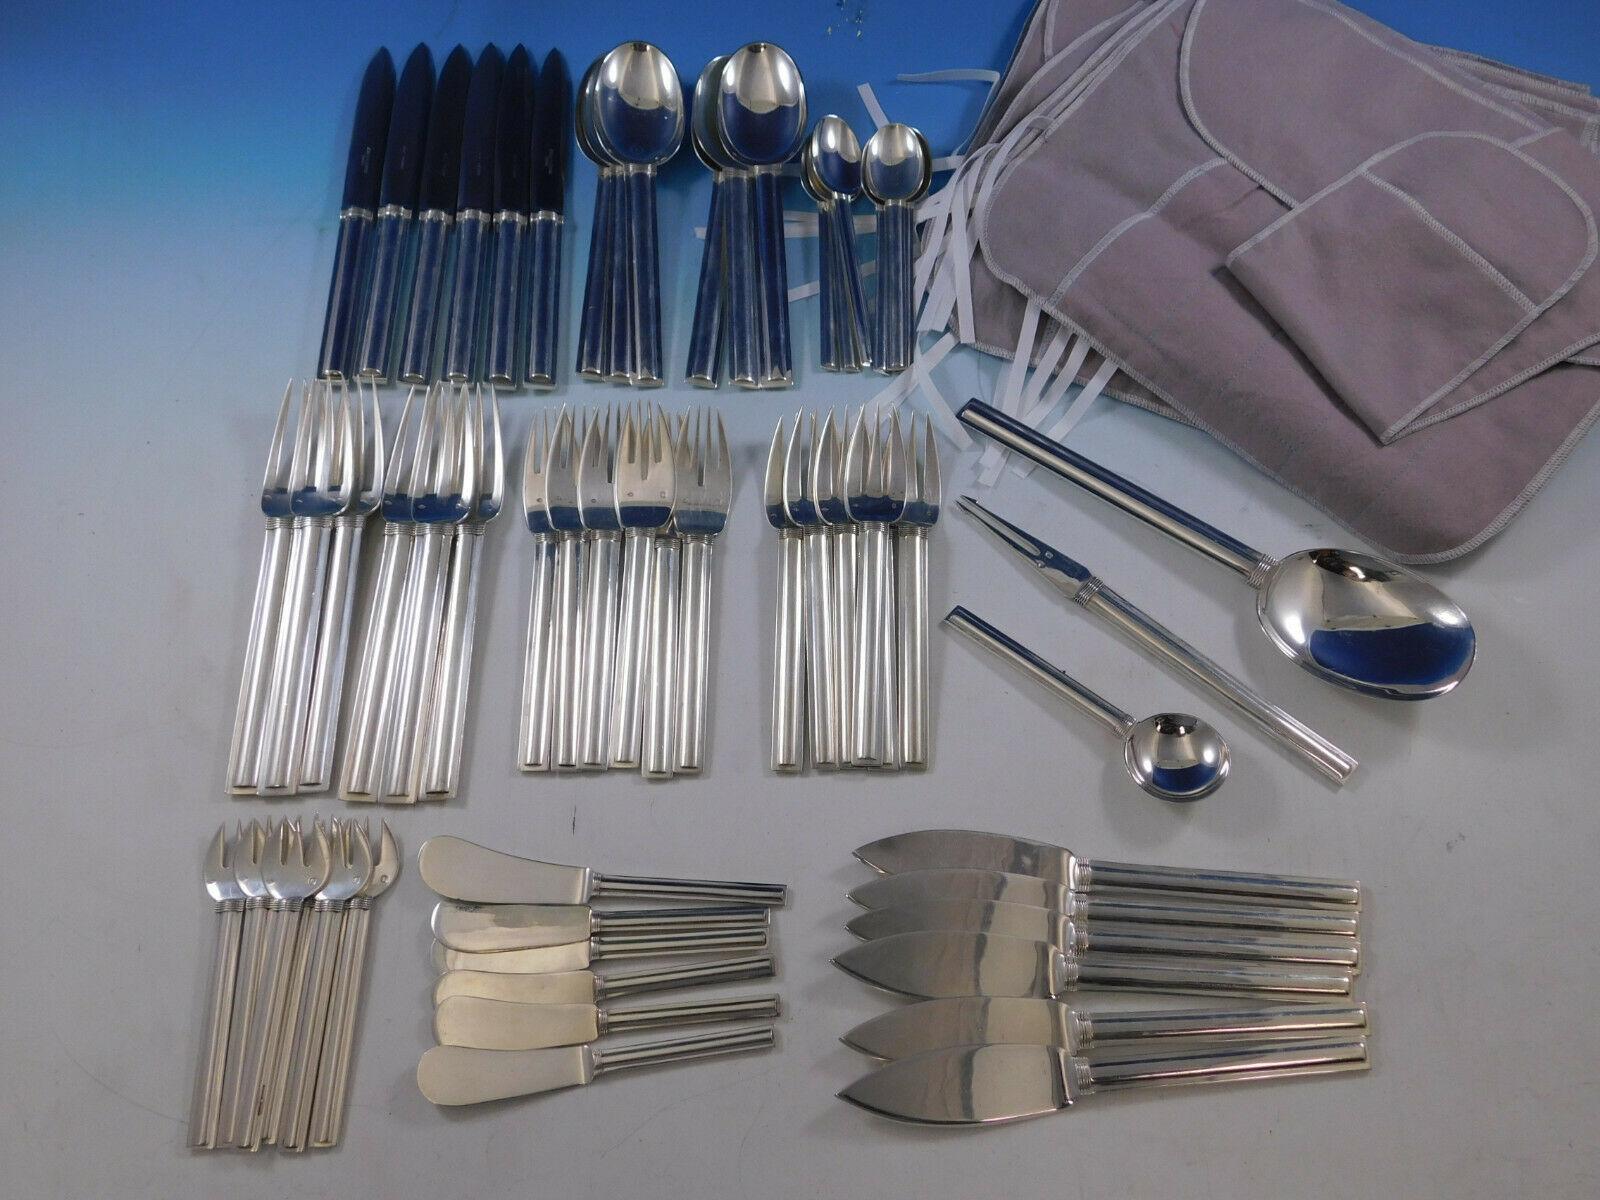 Superb Cannes by Puiforcat France sterling silver flatware set - 74 pieces. This set includes:

8 dinner knives, 9 1/8